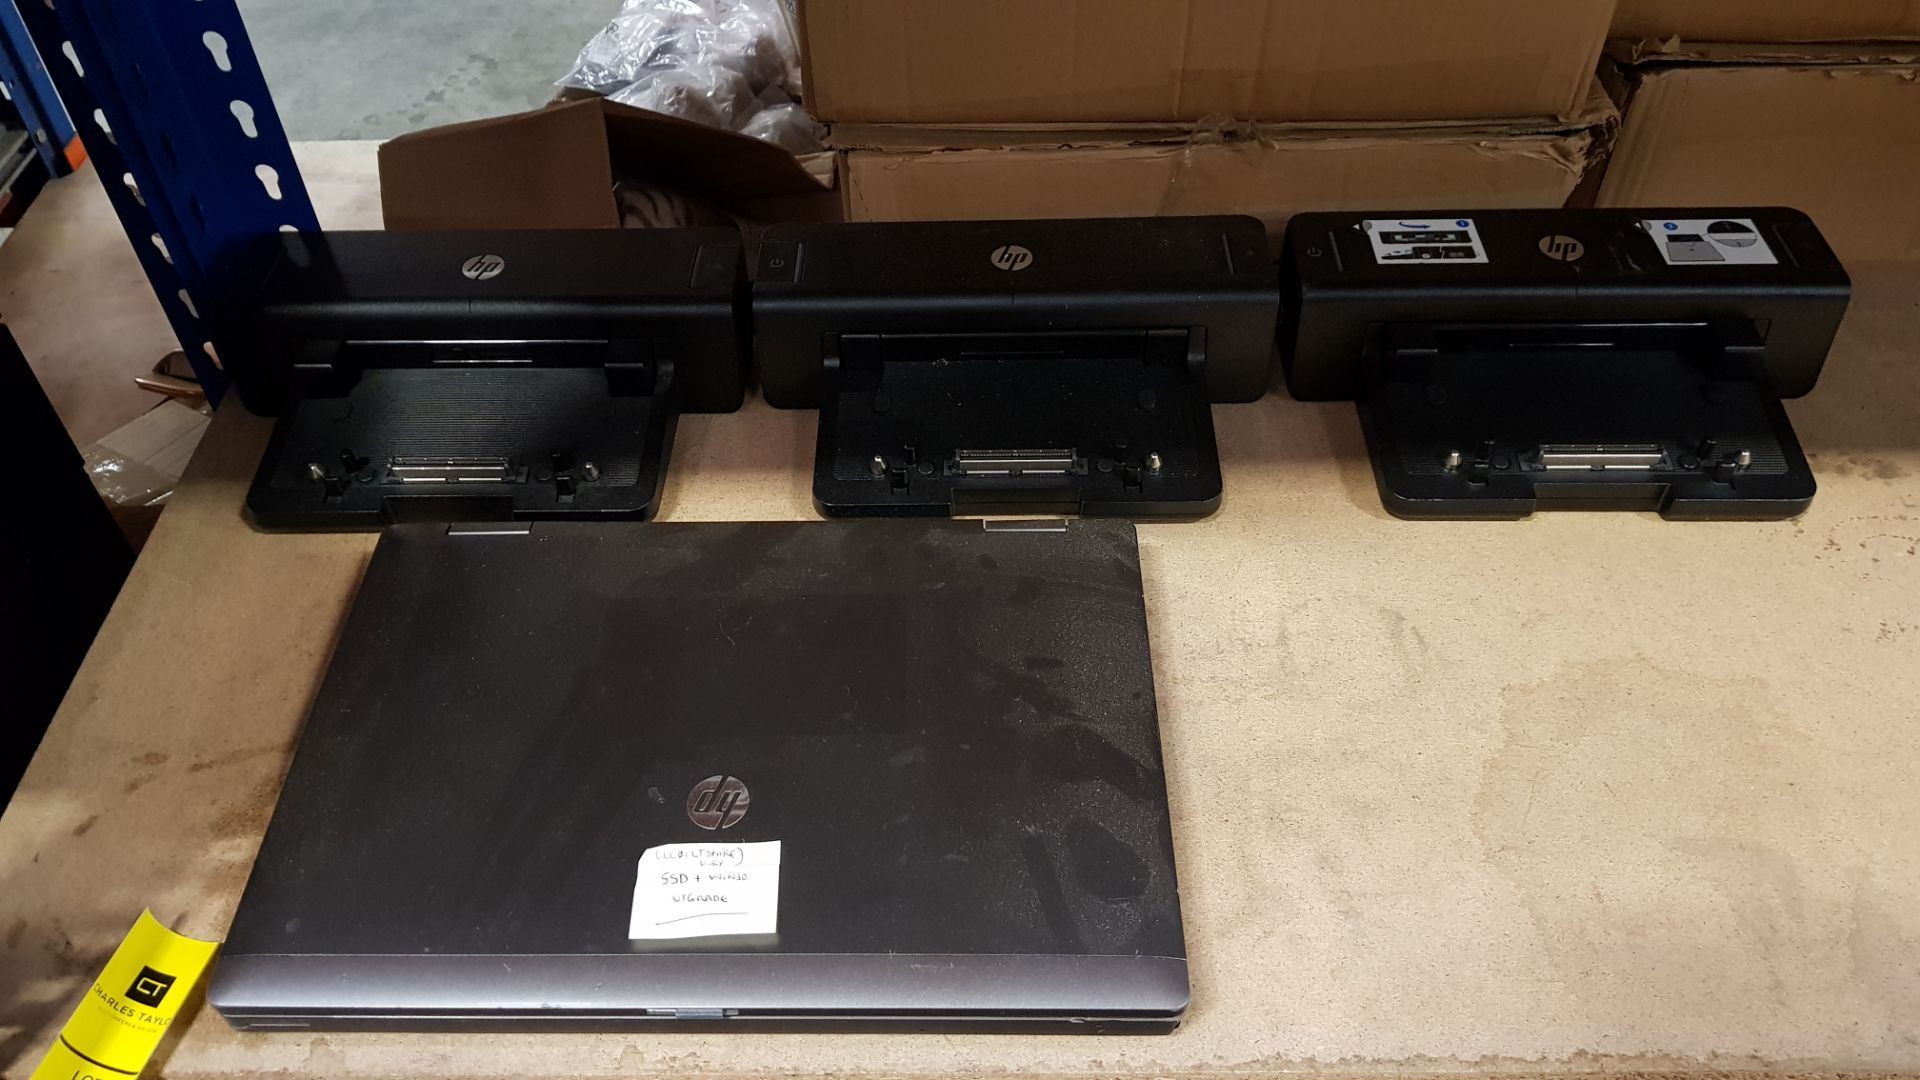 4 PIECE IT LOT CONTAINING 3 X HP DOCKING STATION (SERIAL : CNU315XWMY) AND 1 X HP PROBOOK 6465B